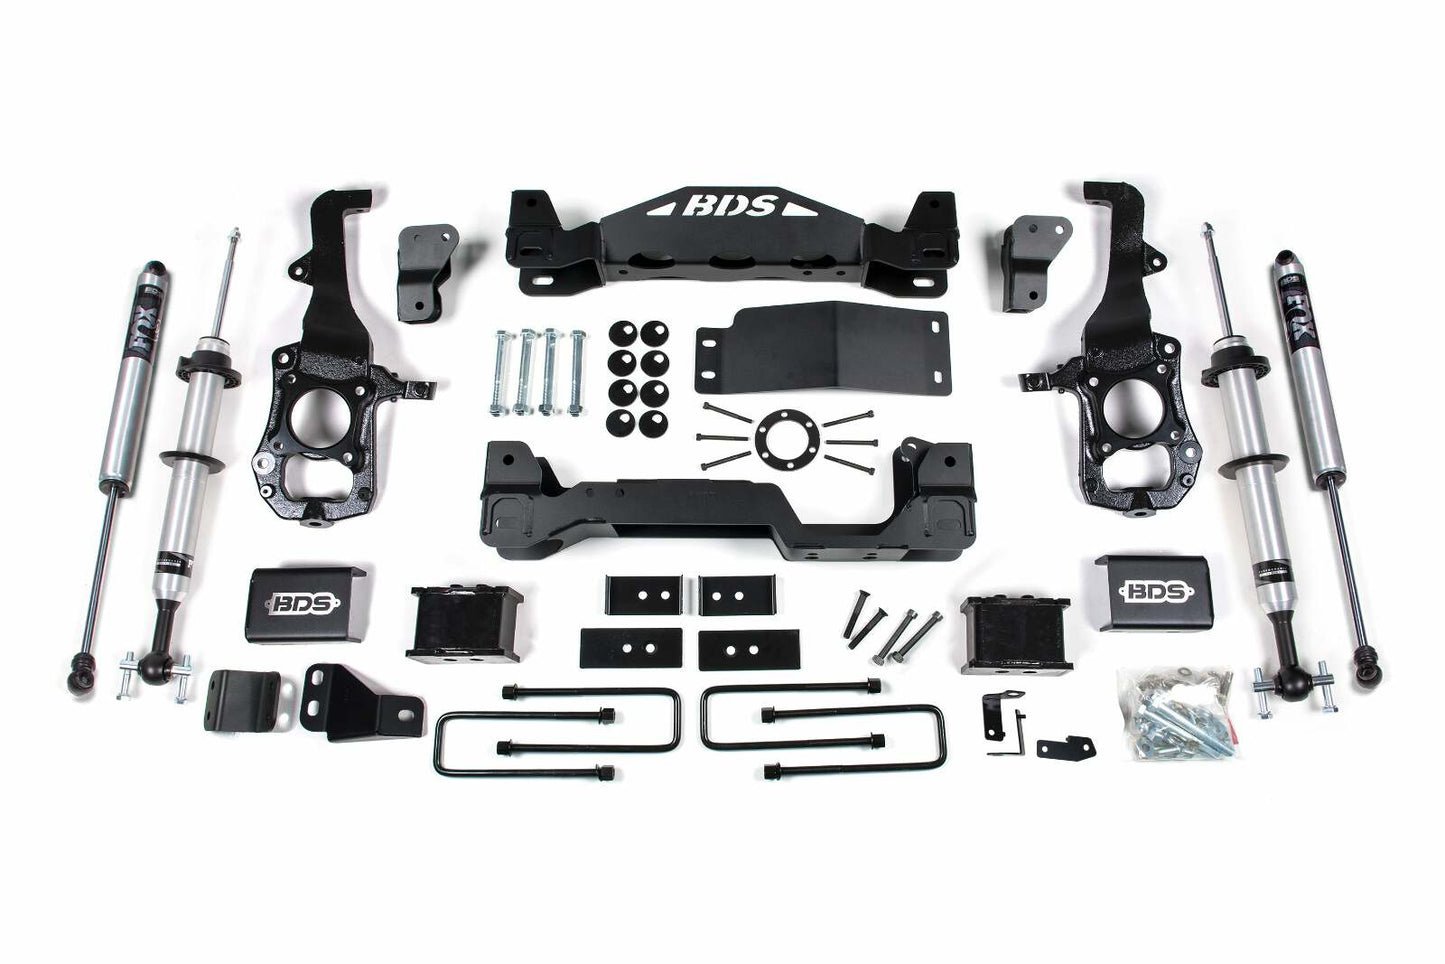 2021-2024 Ford F150 4wd 6" Suspension Lift Kit, 3" Rear Block - Fox 2.0 IFP PS Snap Ring Front, Fox 2.0 IFP PS Rear